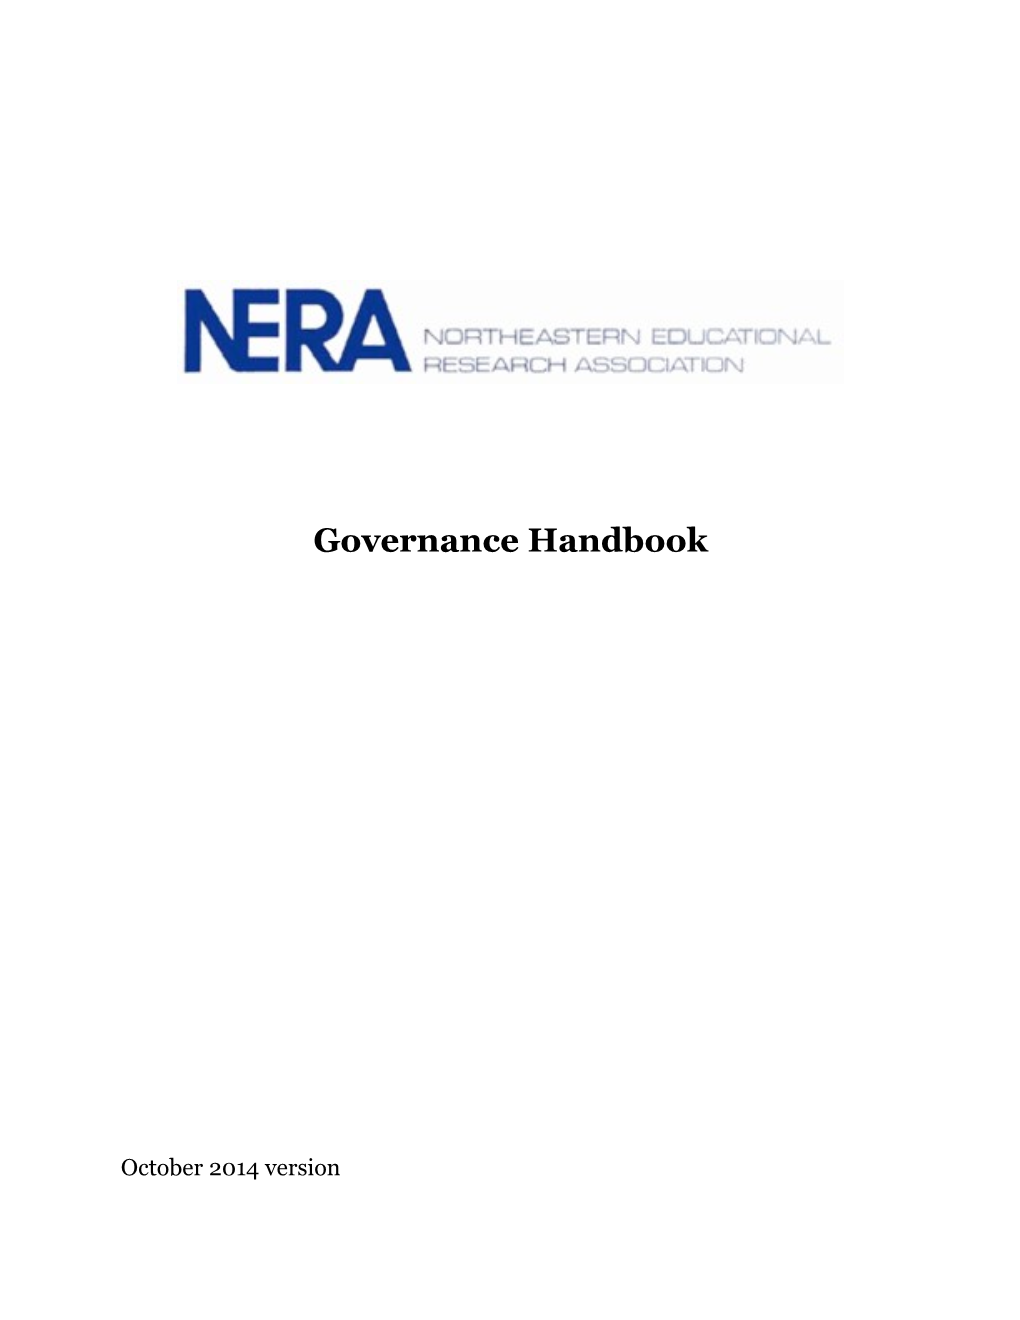 Overview of the Governance Handbook